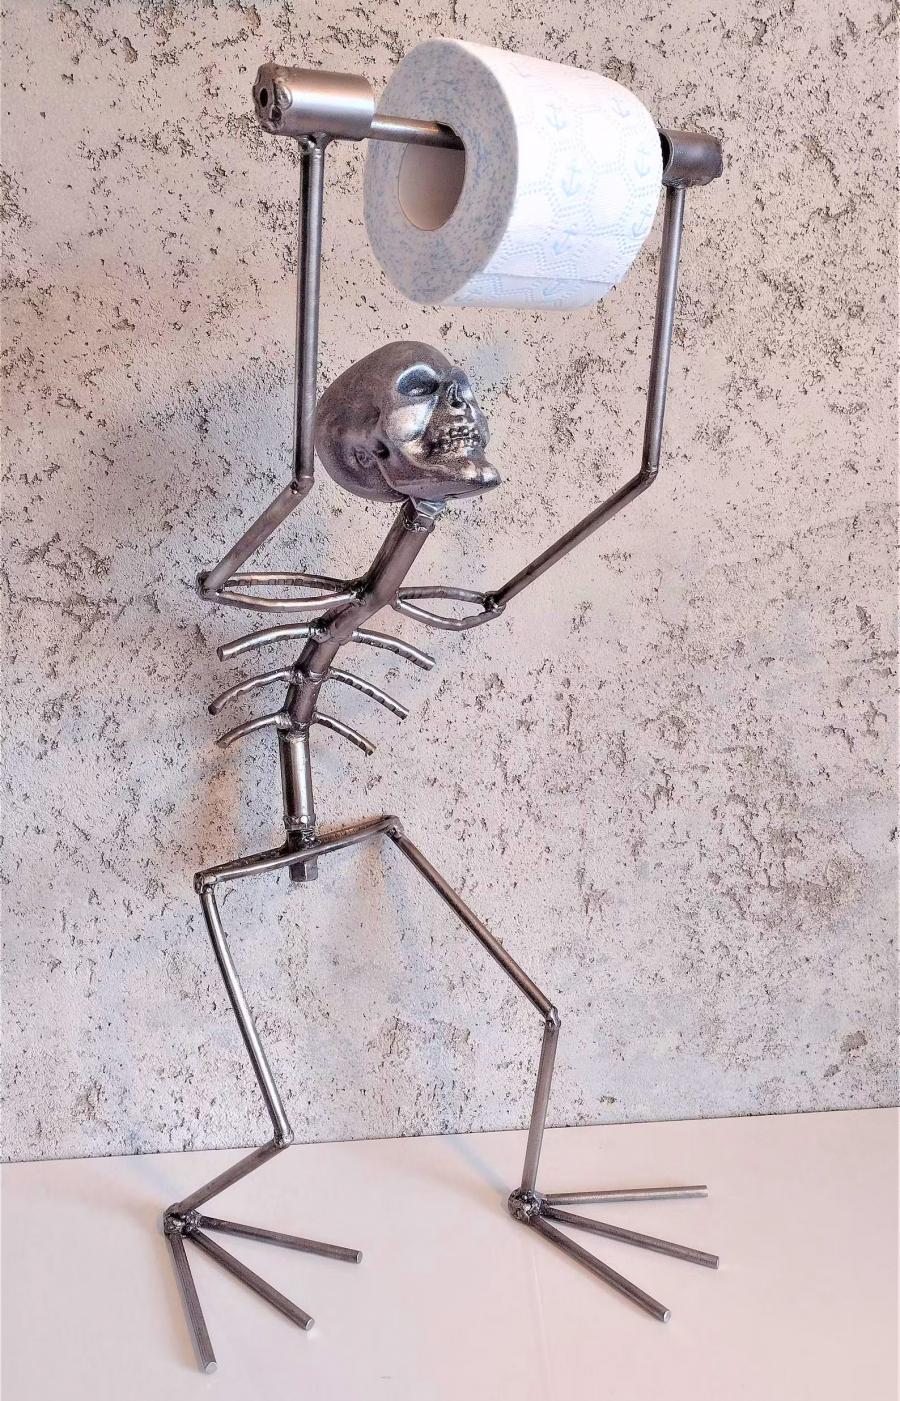 Creepy Metal Skeleton Toilet Paper Holder - your butt napkins my lord